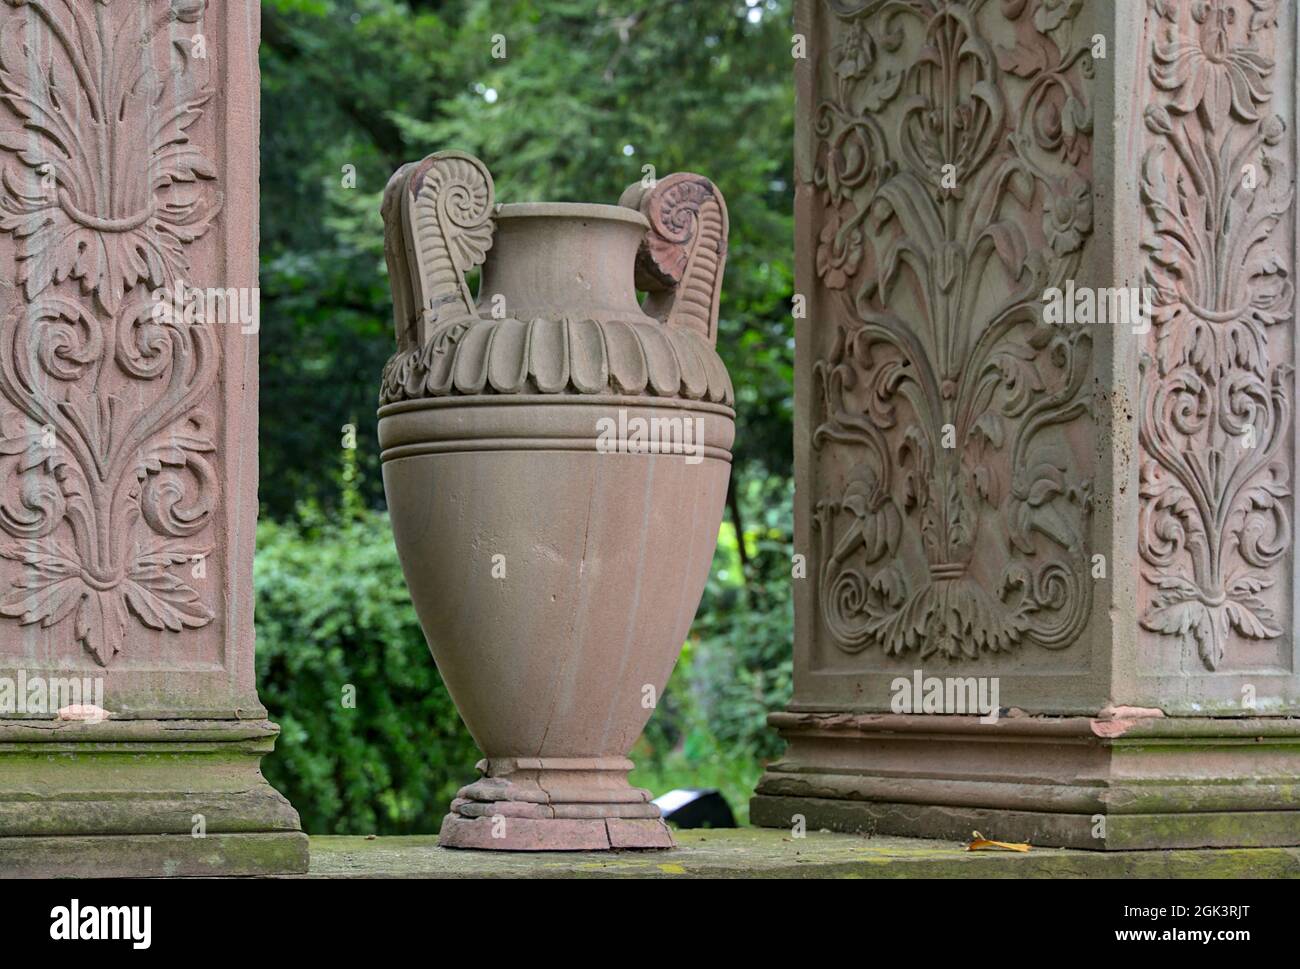 Antique-styled stone vase surrounded by decorative stone plates in a cemetery Stock Photo